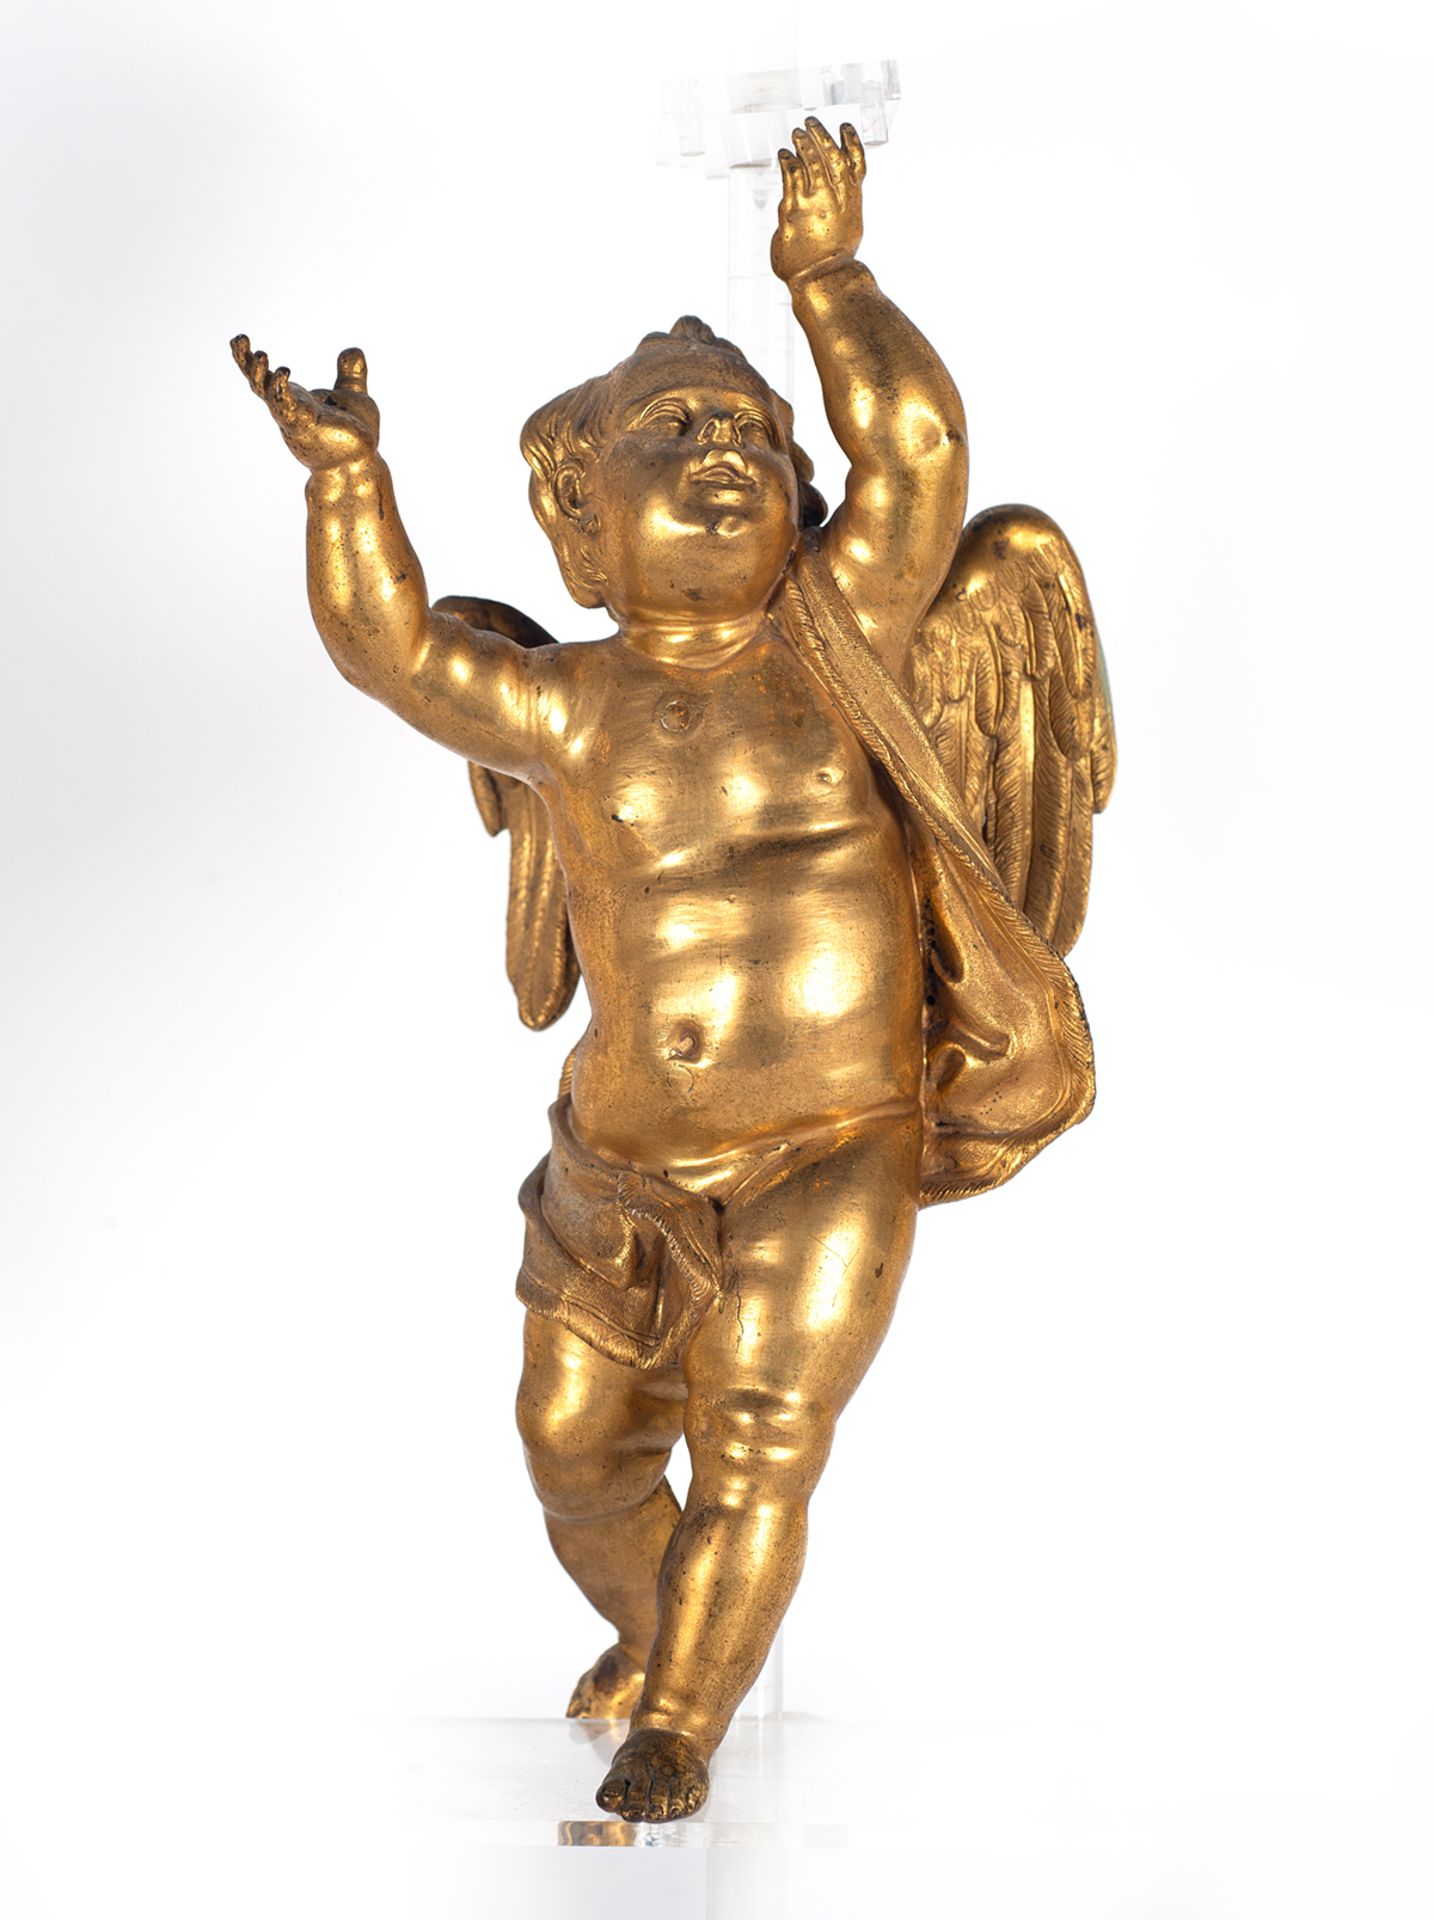 Exceptional pair of angels in gilded bronze, 16th-17th century